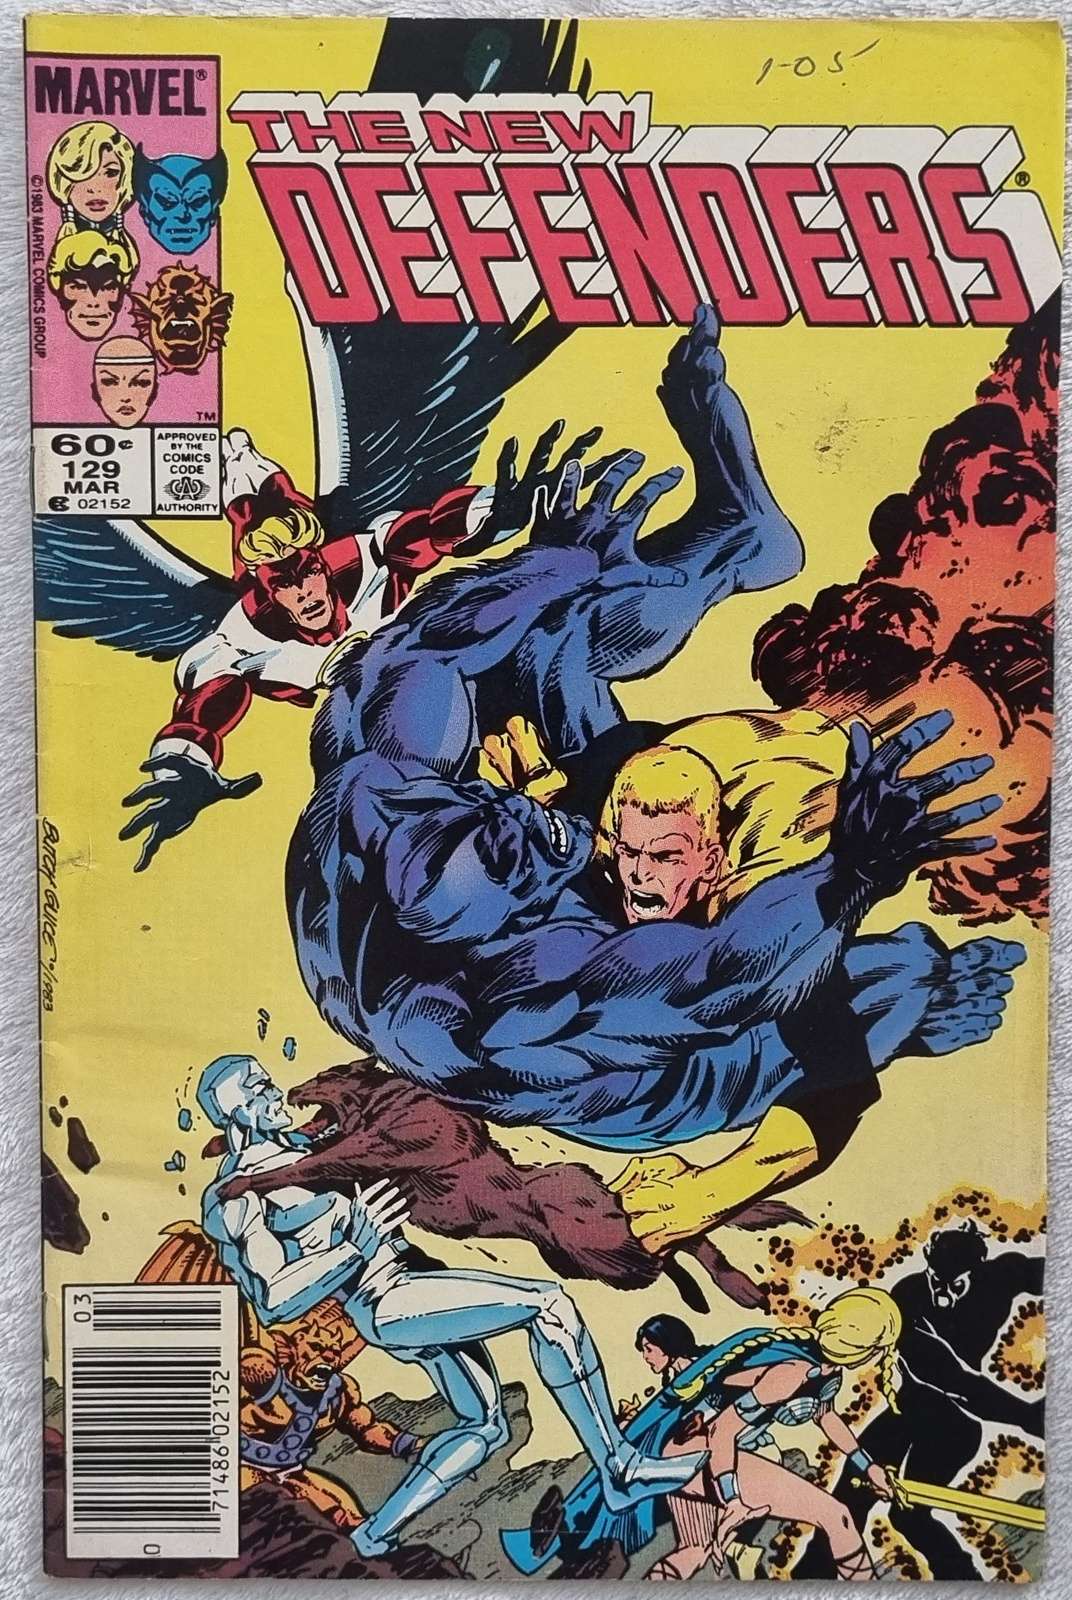 The New Defenders - #129 - VF-